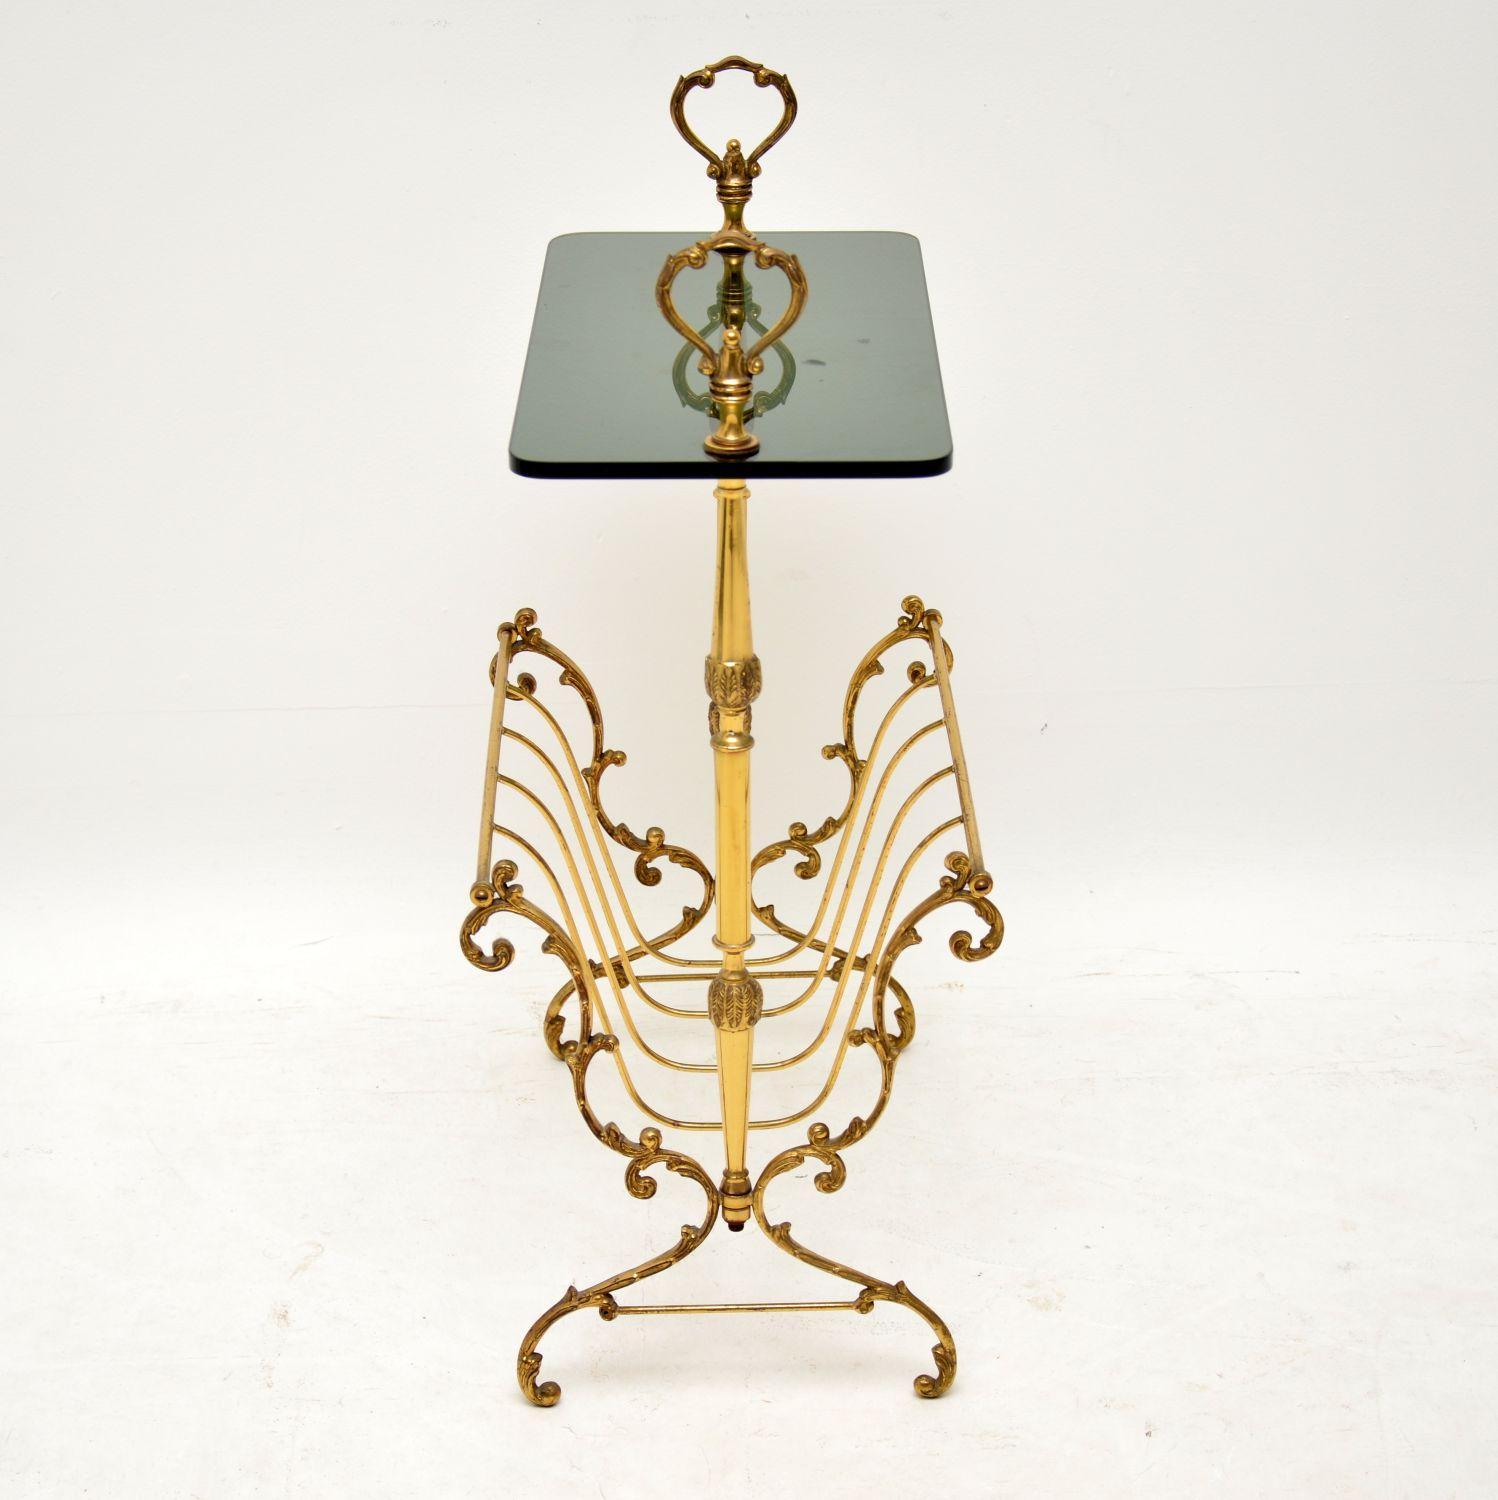 A beautiful and very well made vintage side table in brass, with a fixed glass top and a built in paper rack. This is of excellent quality, has a stunning design and is in superb vintage condition, with only some extremely minor wear. This is a